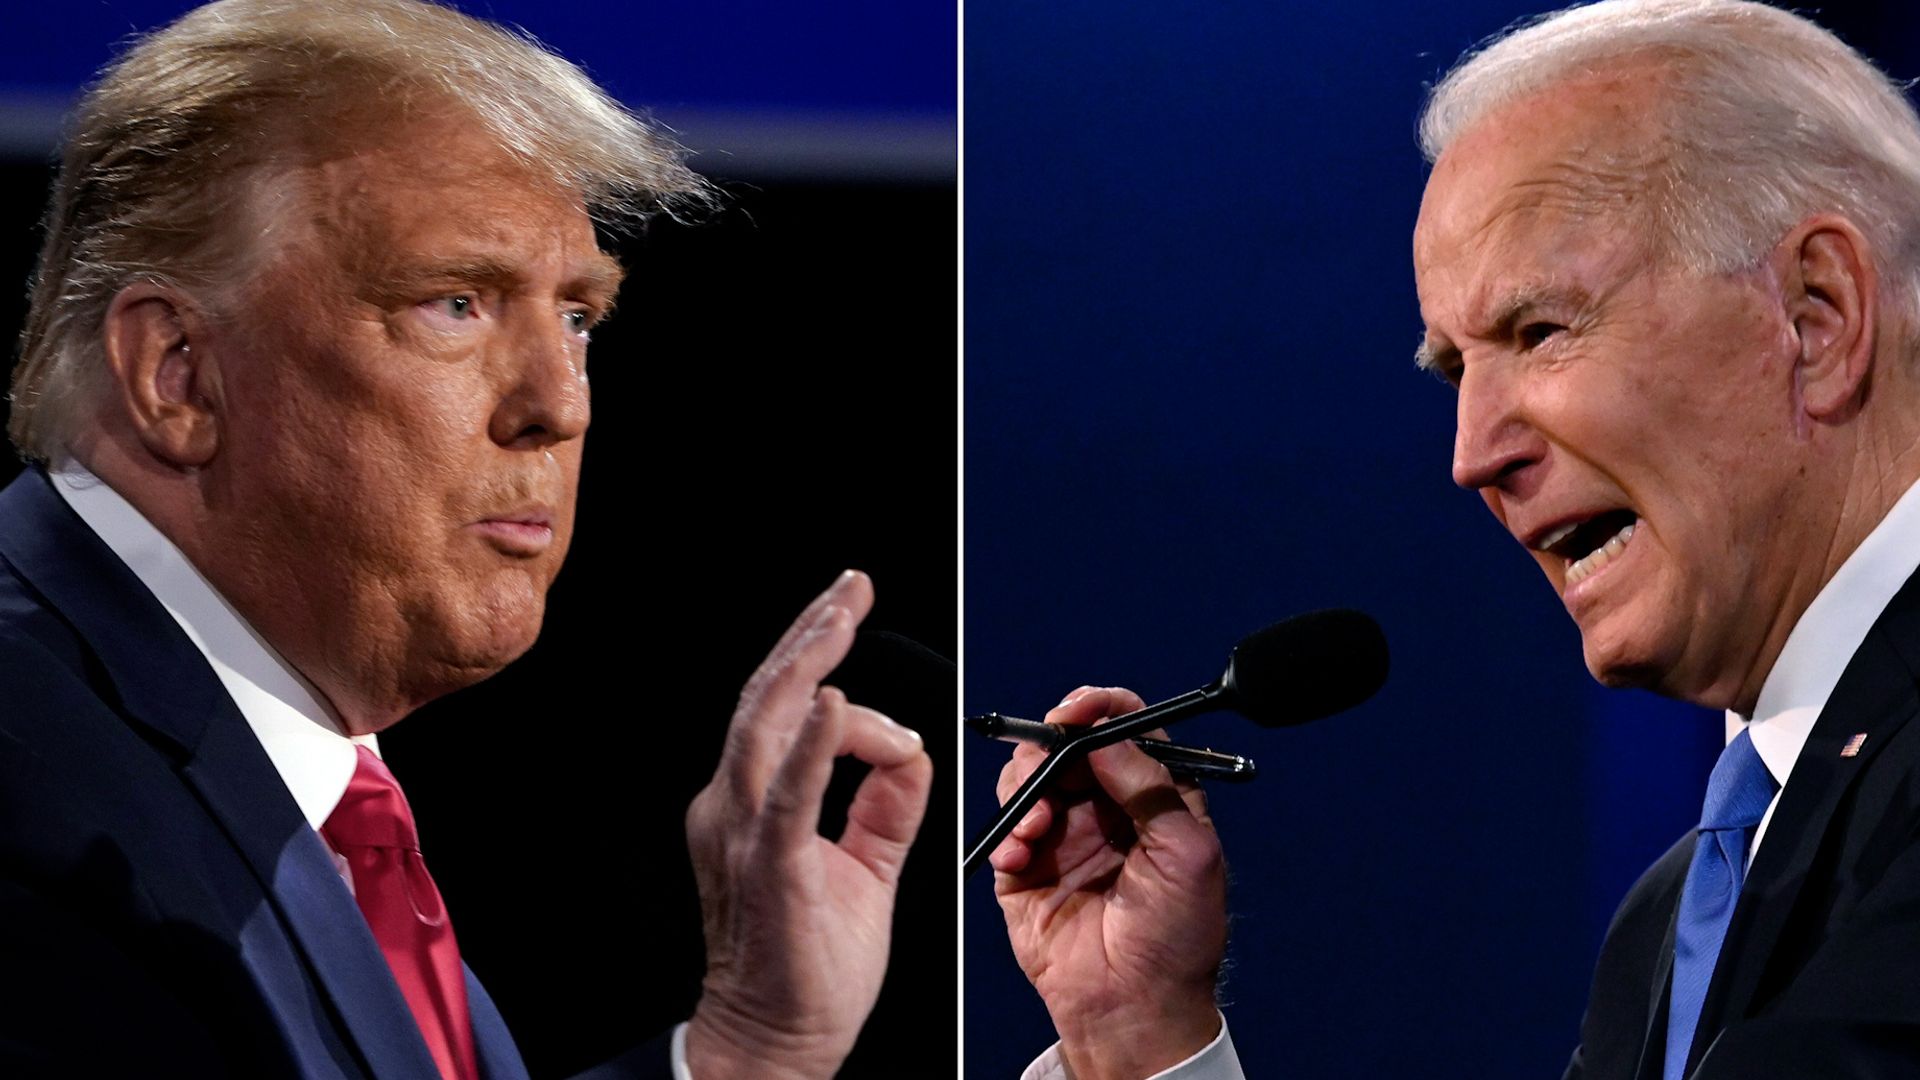 With six months until the election, polling data gives Trump an advantage over President Biden in the Electoral College, if not the popular vote.